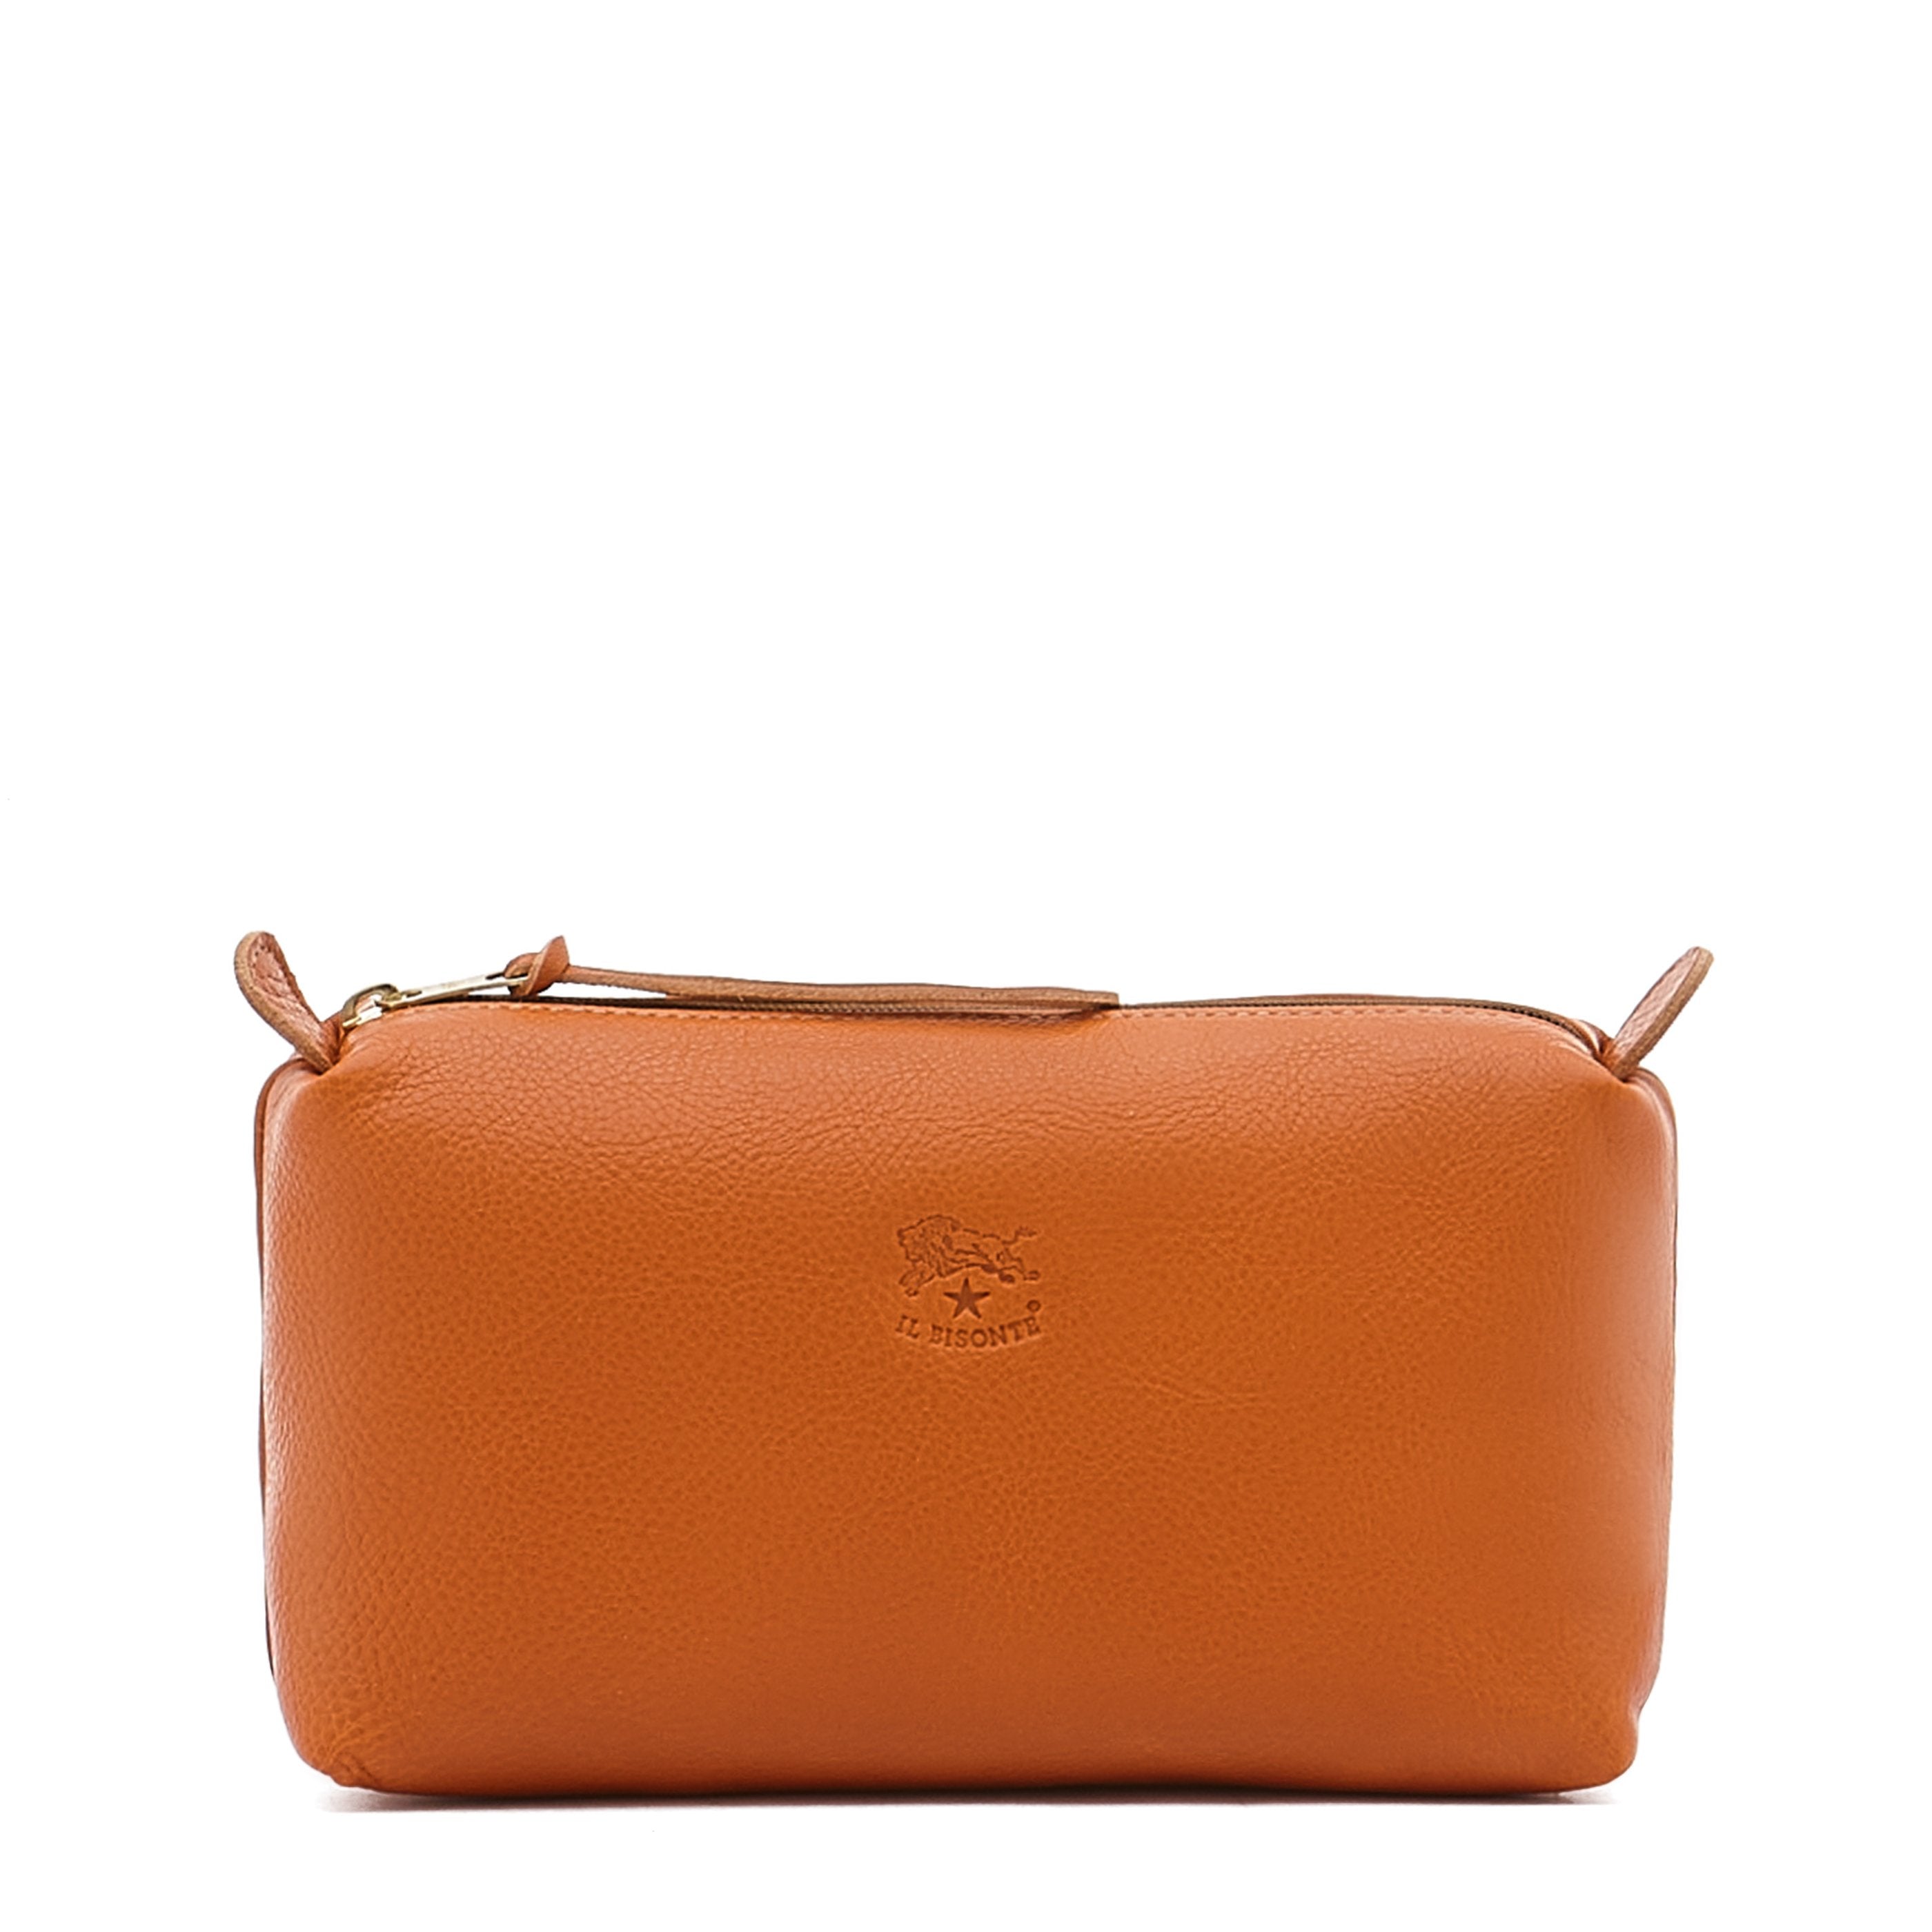 Women's case in calf leather color caramel – Il Bisonte